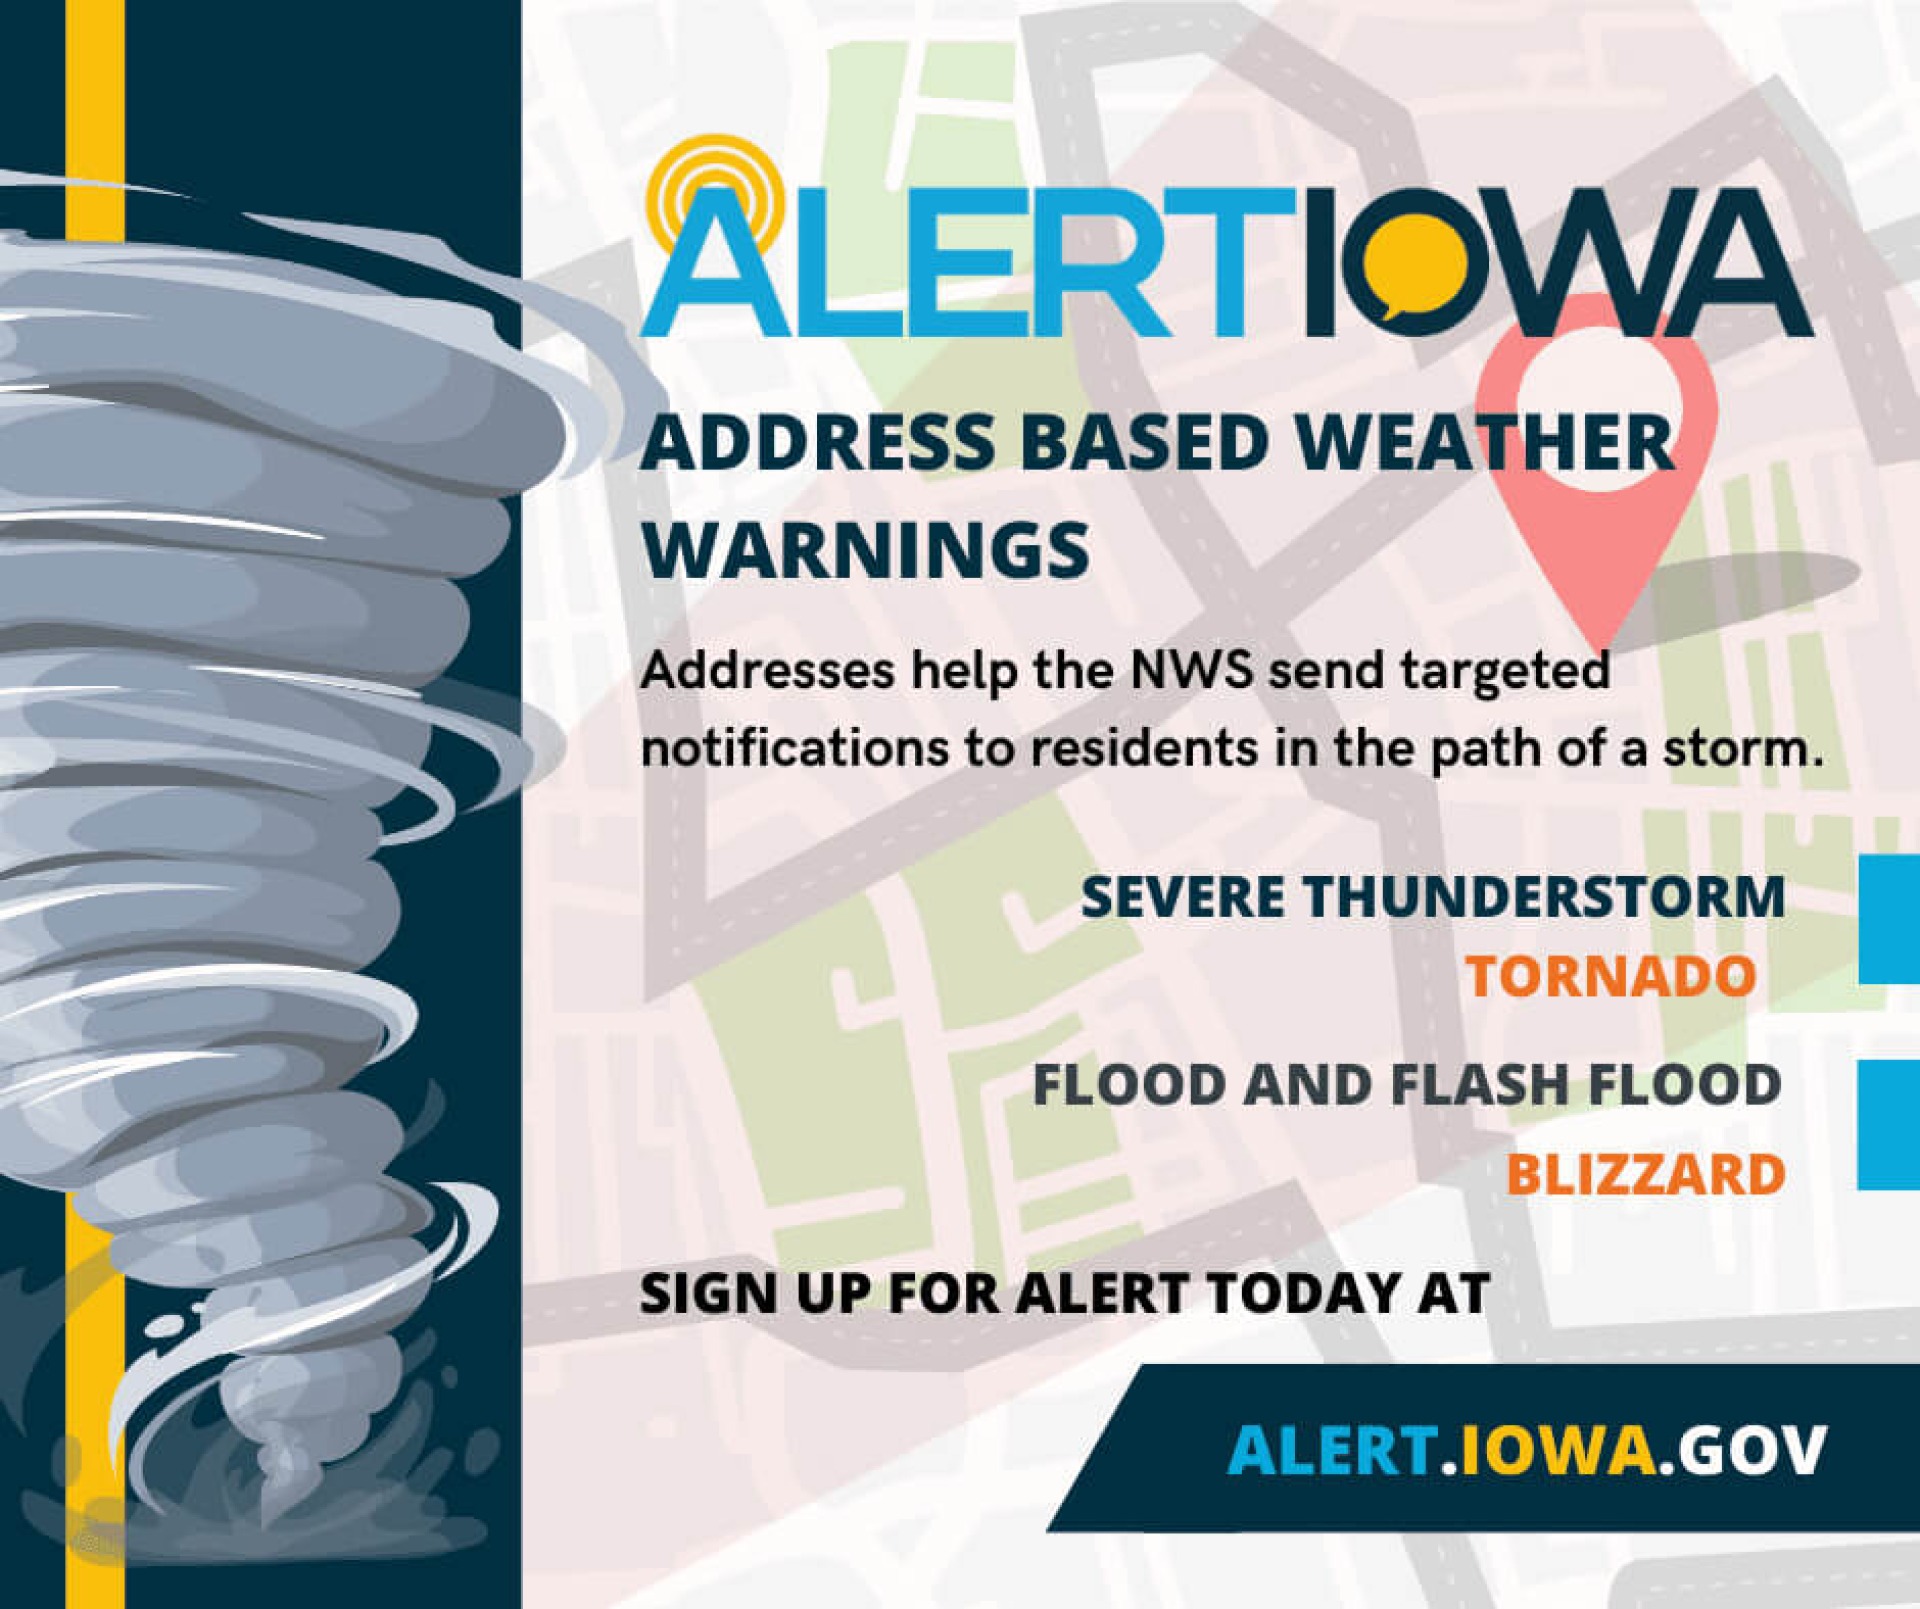 Alert Iowa: Address based weather warnings. Addresses help the NWS send targeted notifications to residents in the path of a storm. Sign up for alerts today at alert.iowa.gov.